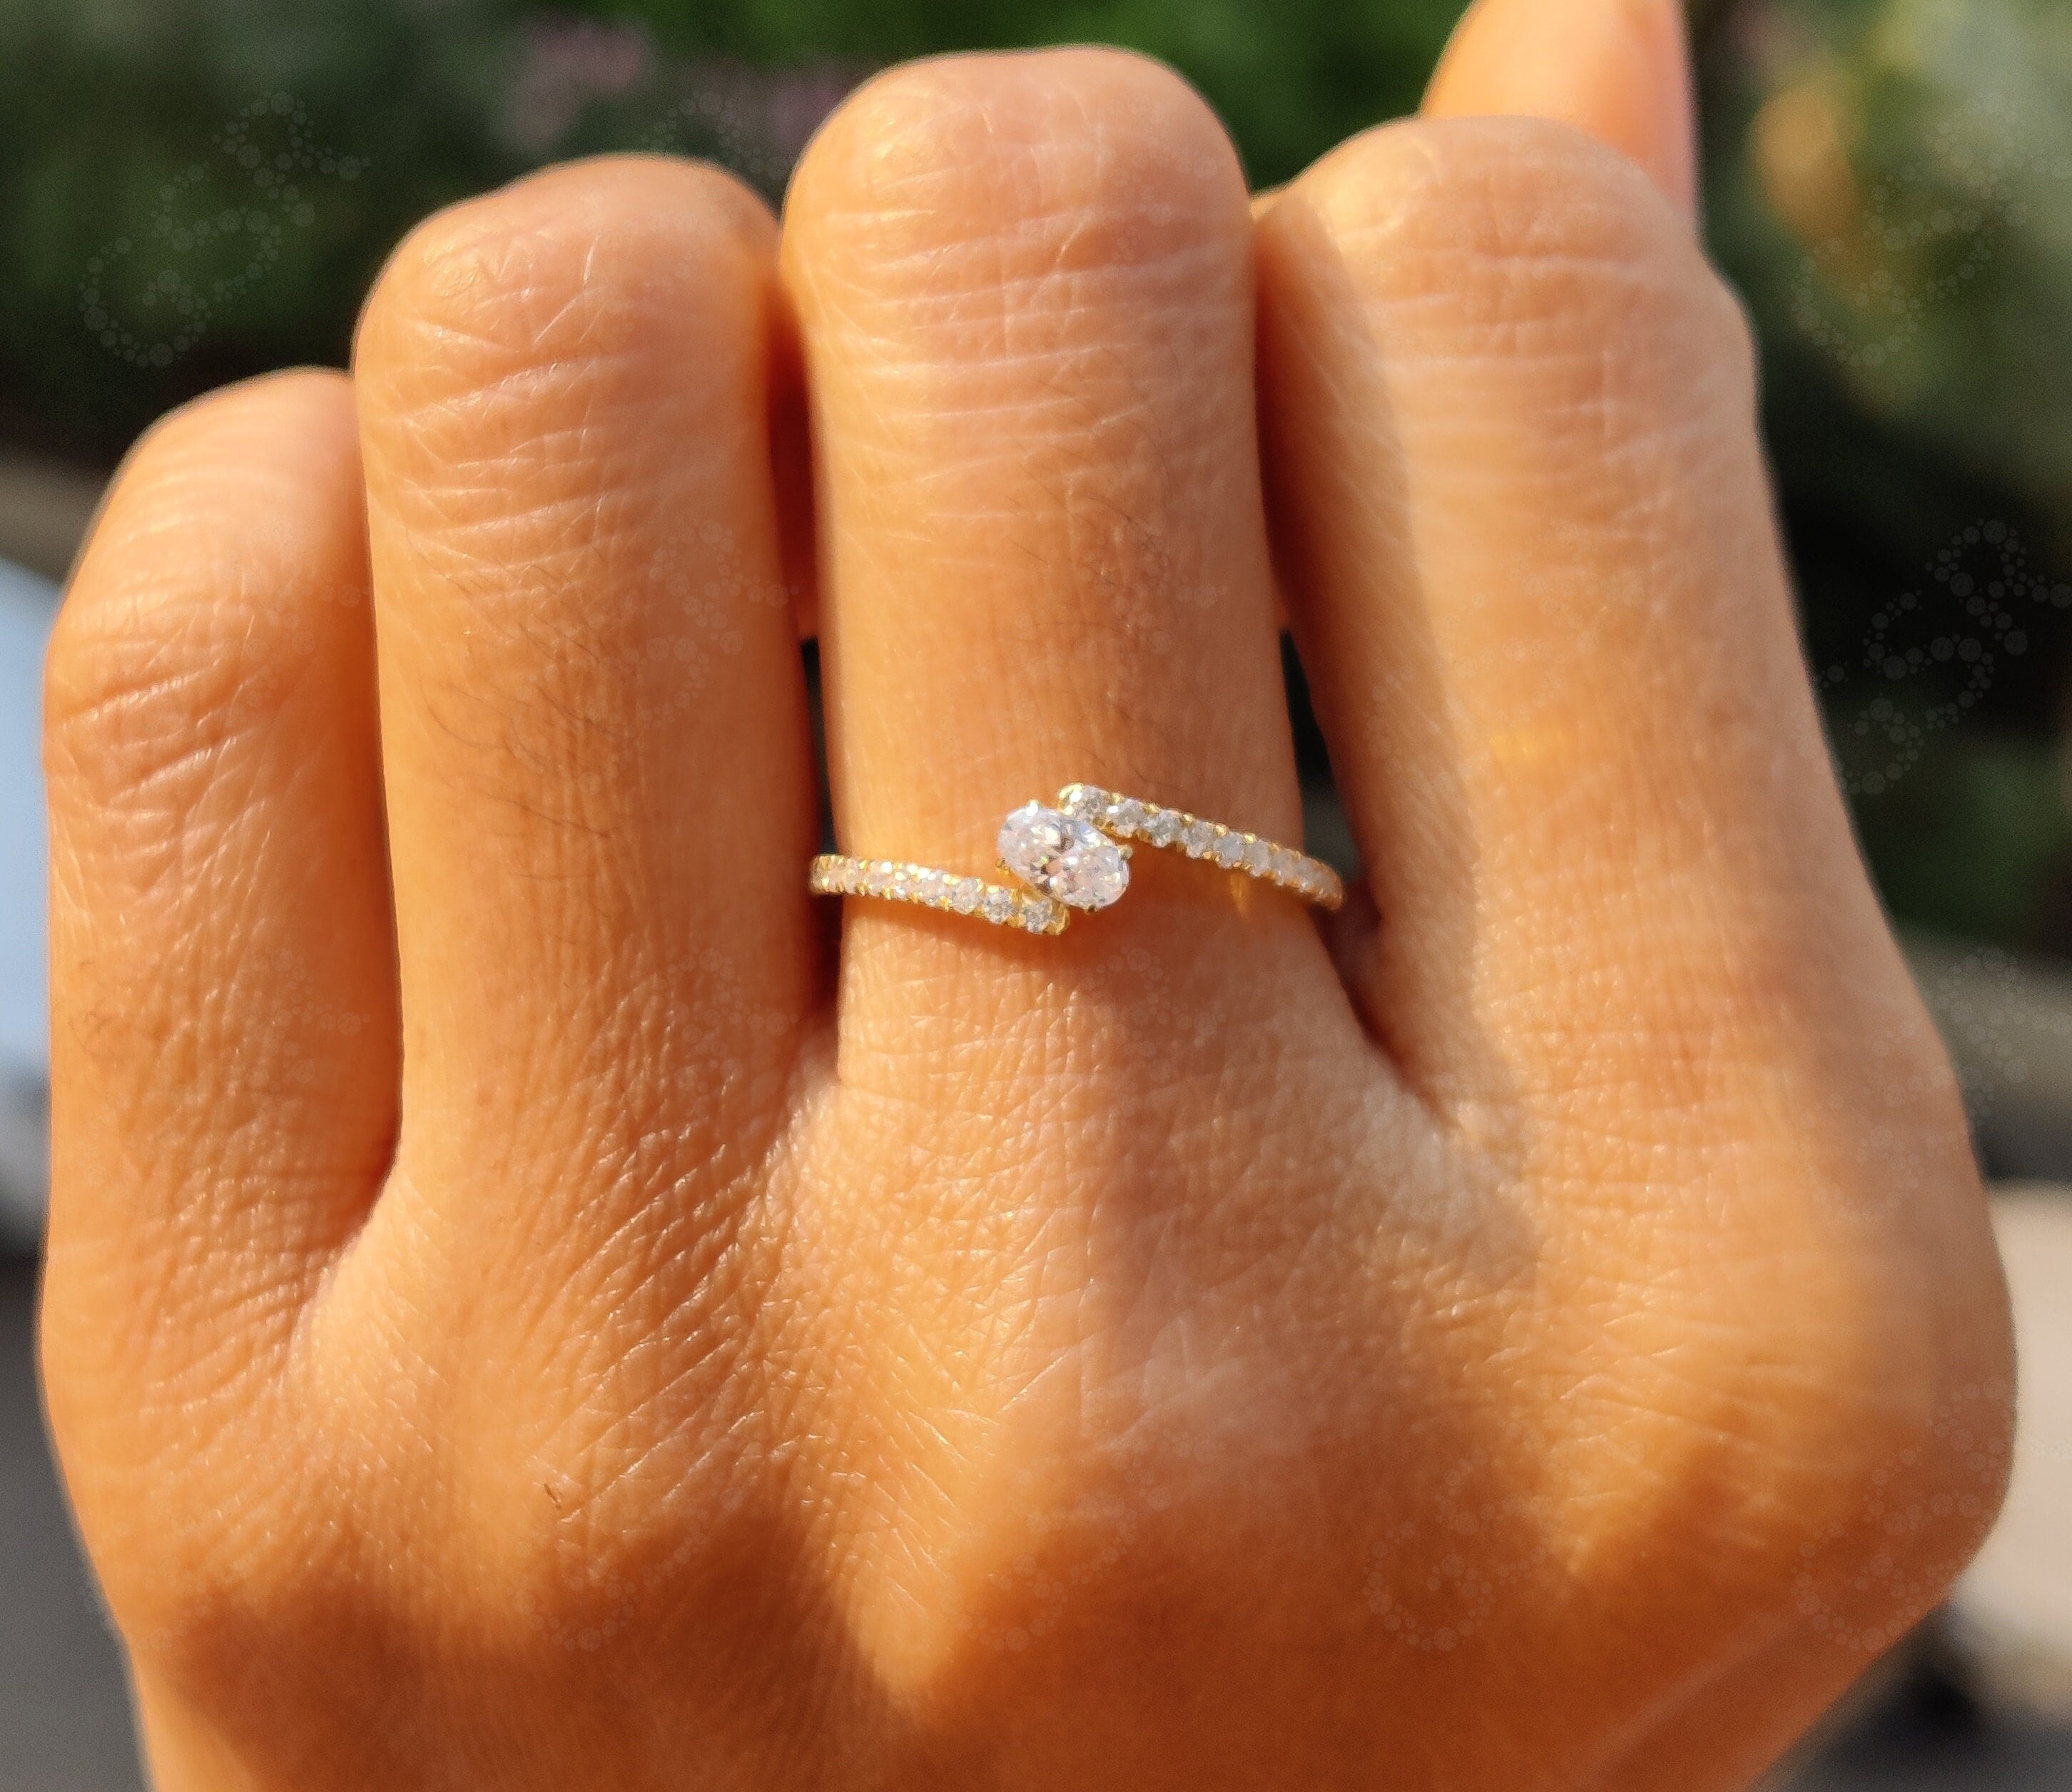 Timeless Elegance: Oval Moissanite Ring in Silver and Gold – The Perfect Cross Over Stacking Ring for a Minimalist and Dainty Women's Engagement Ring